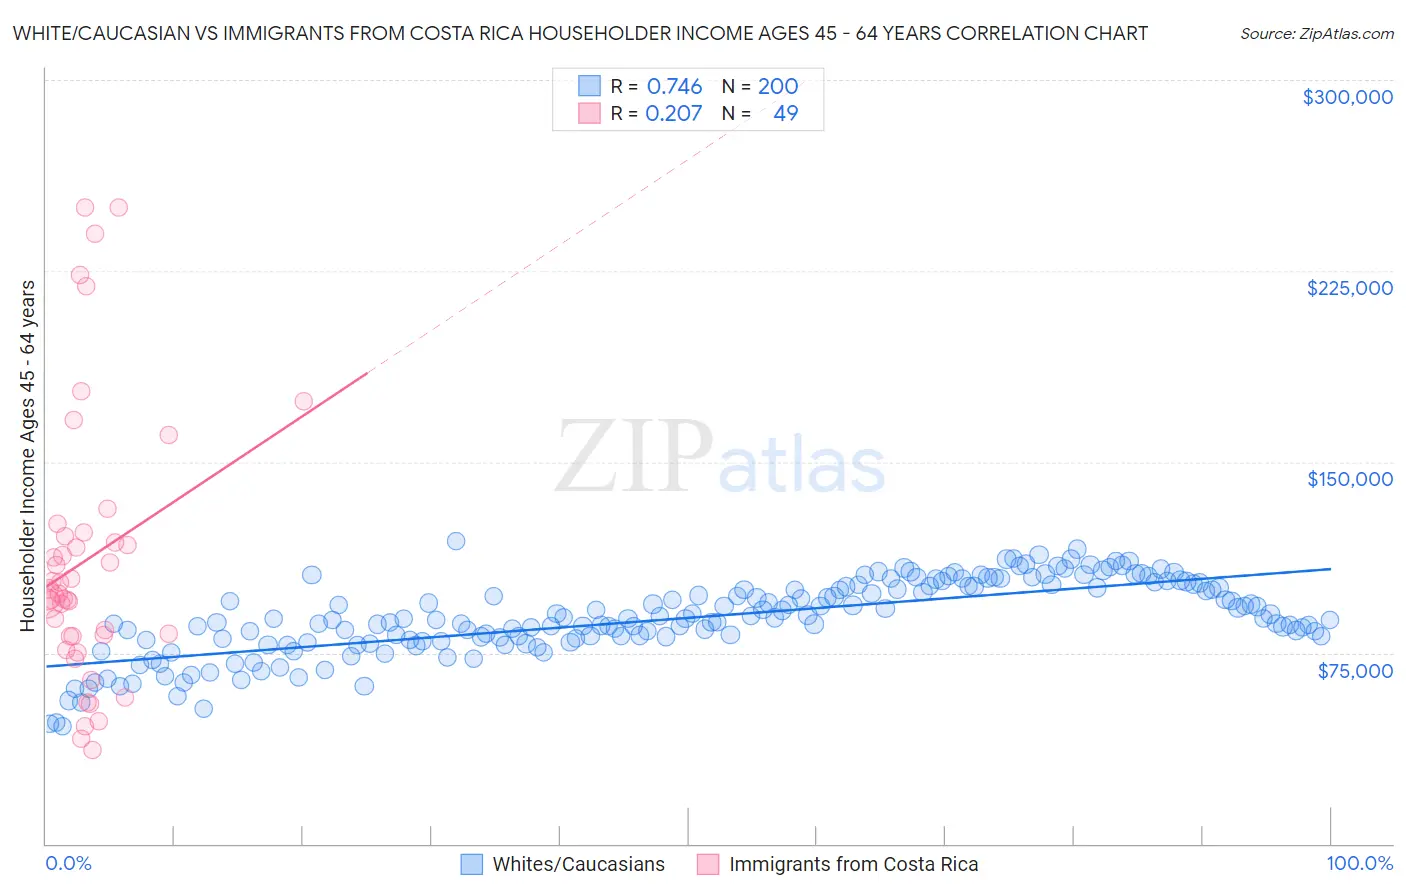 White/Caucasian vs Immigrants from Costa Rica Householder Income Ages 45 - 64 years